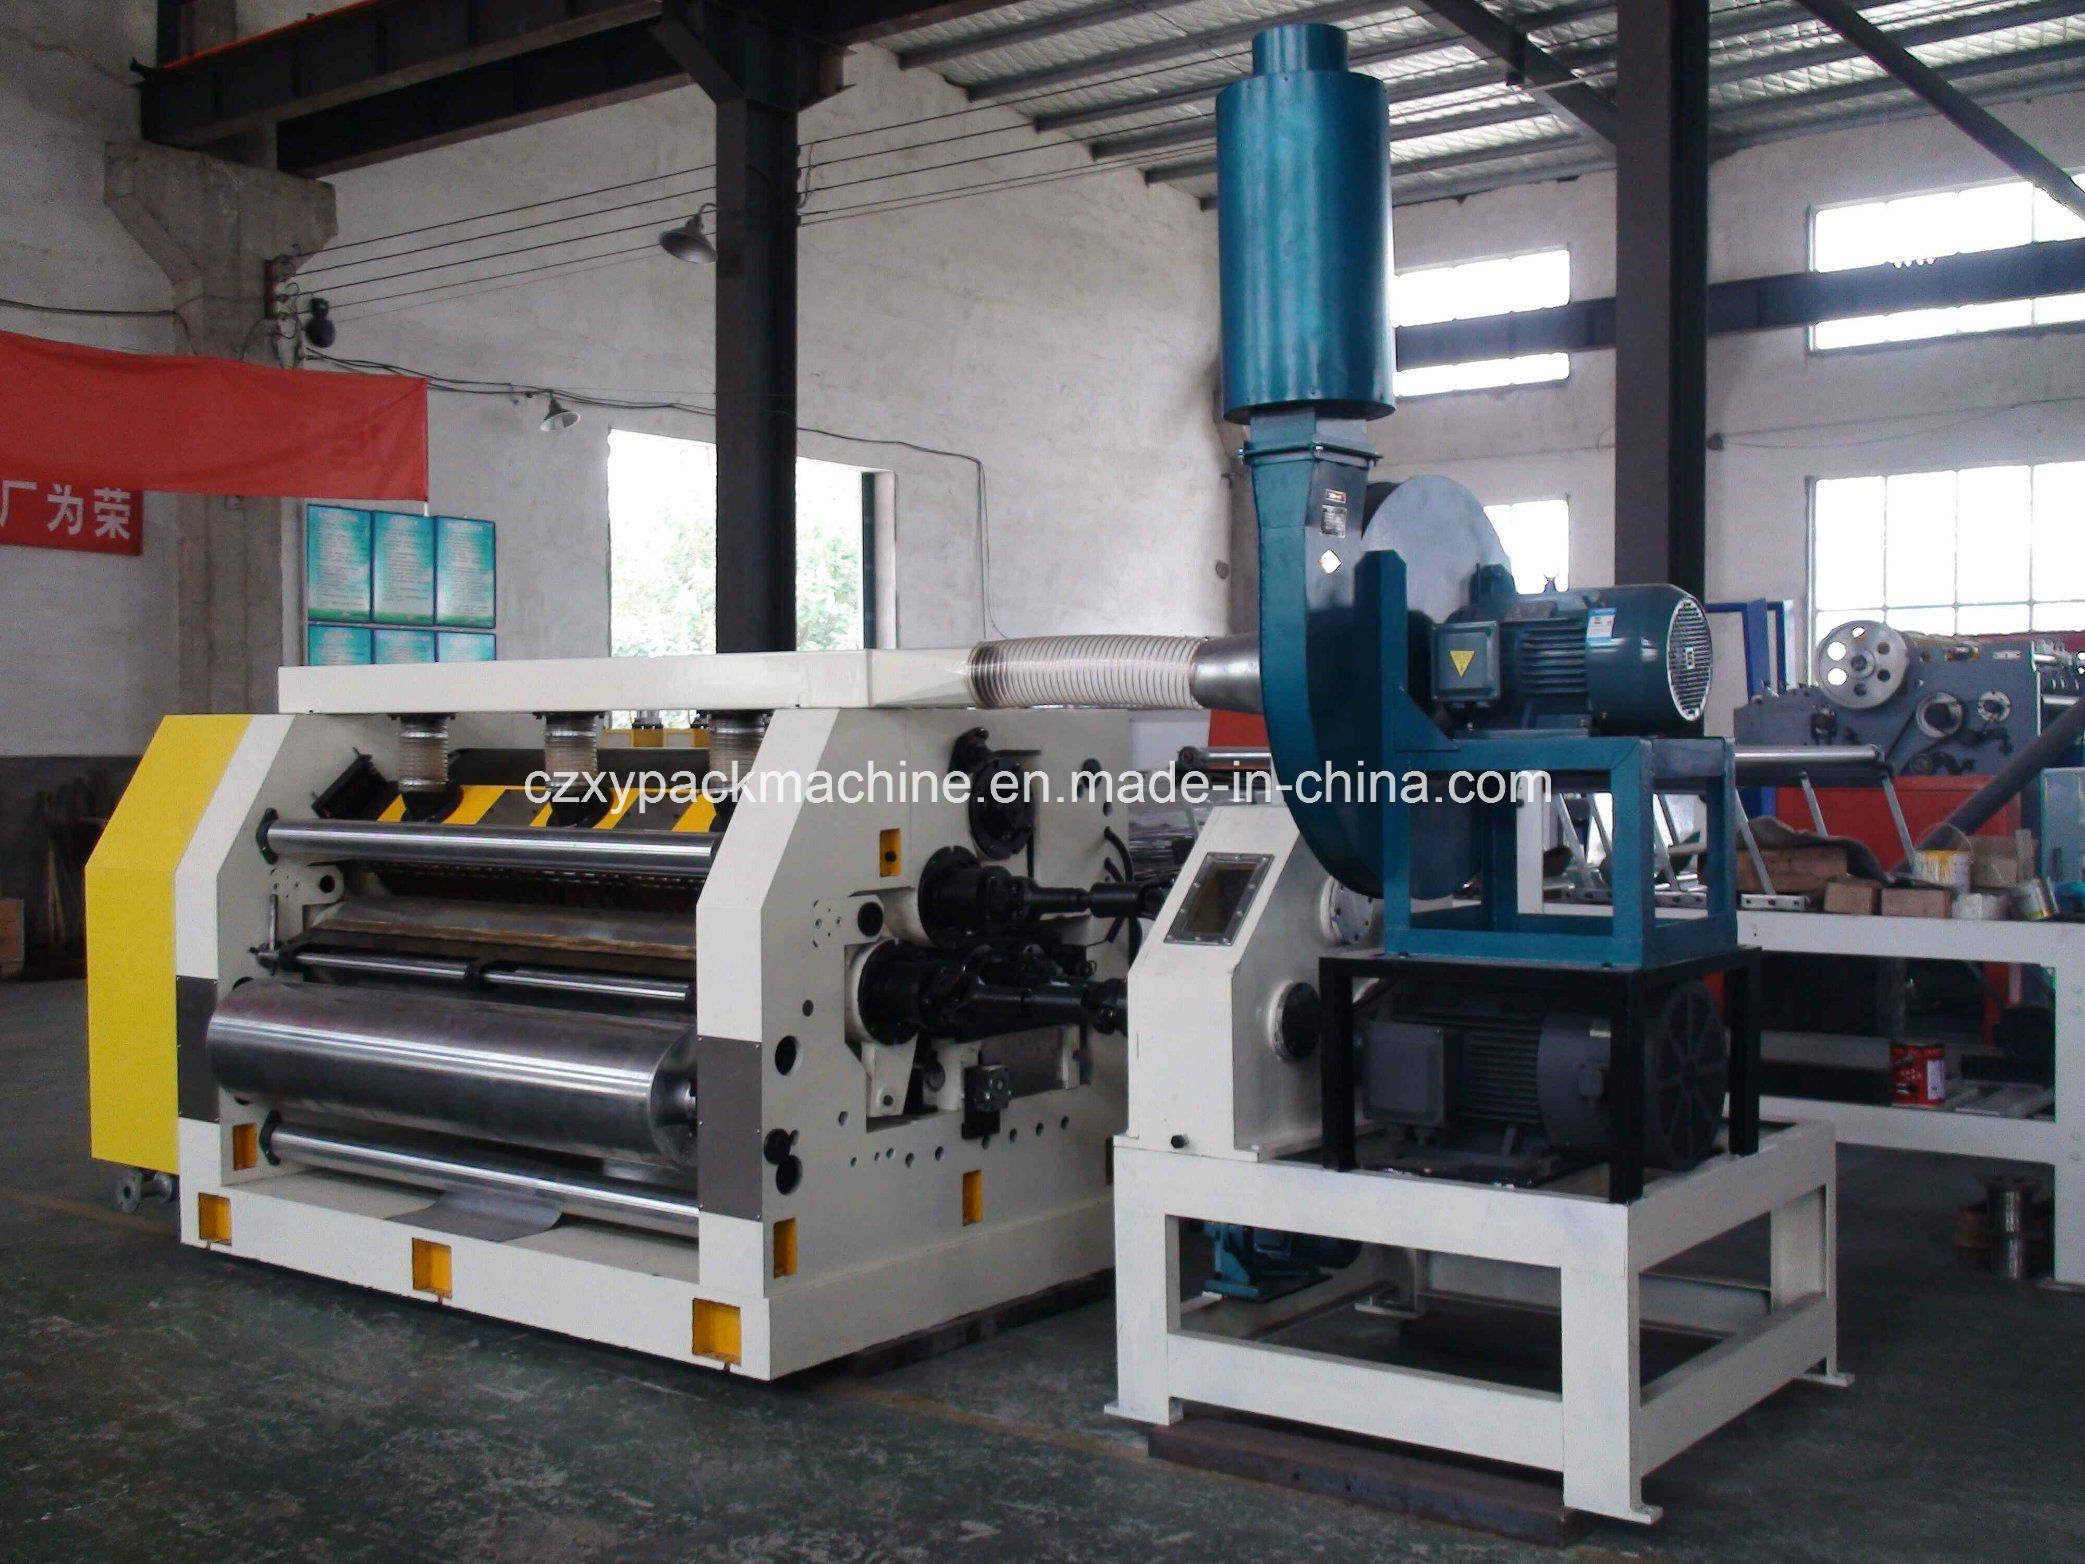 Factory Price 3 Ply Corrugated Carton Production Line